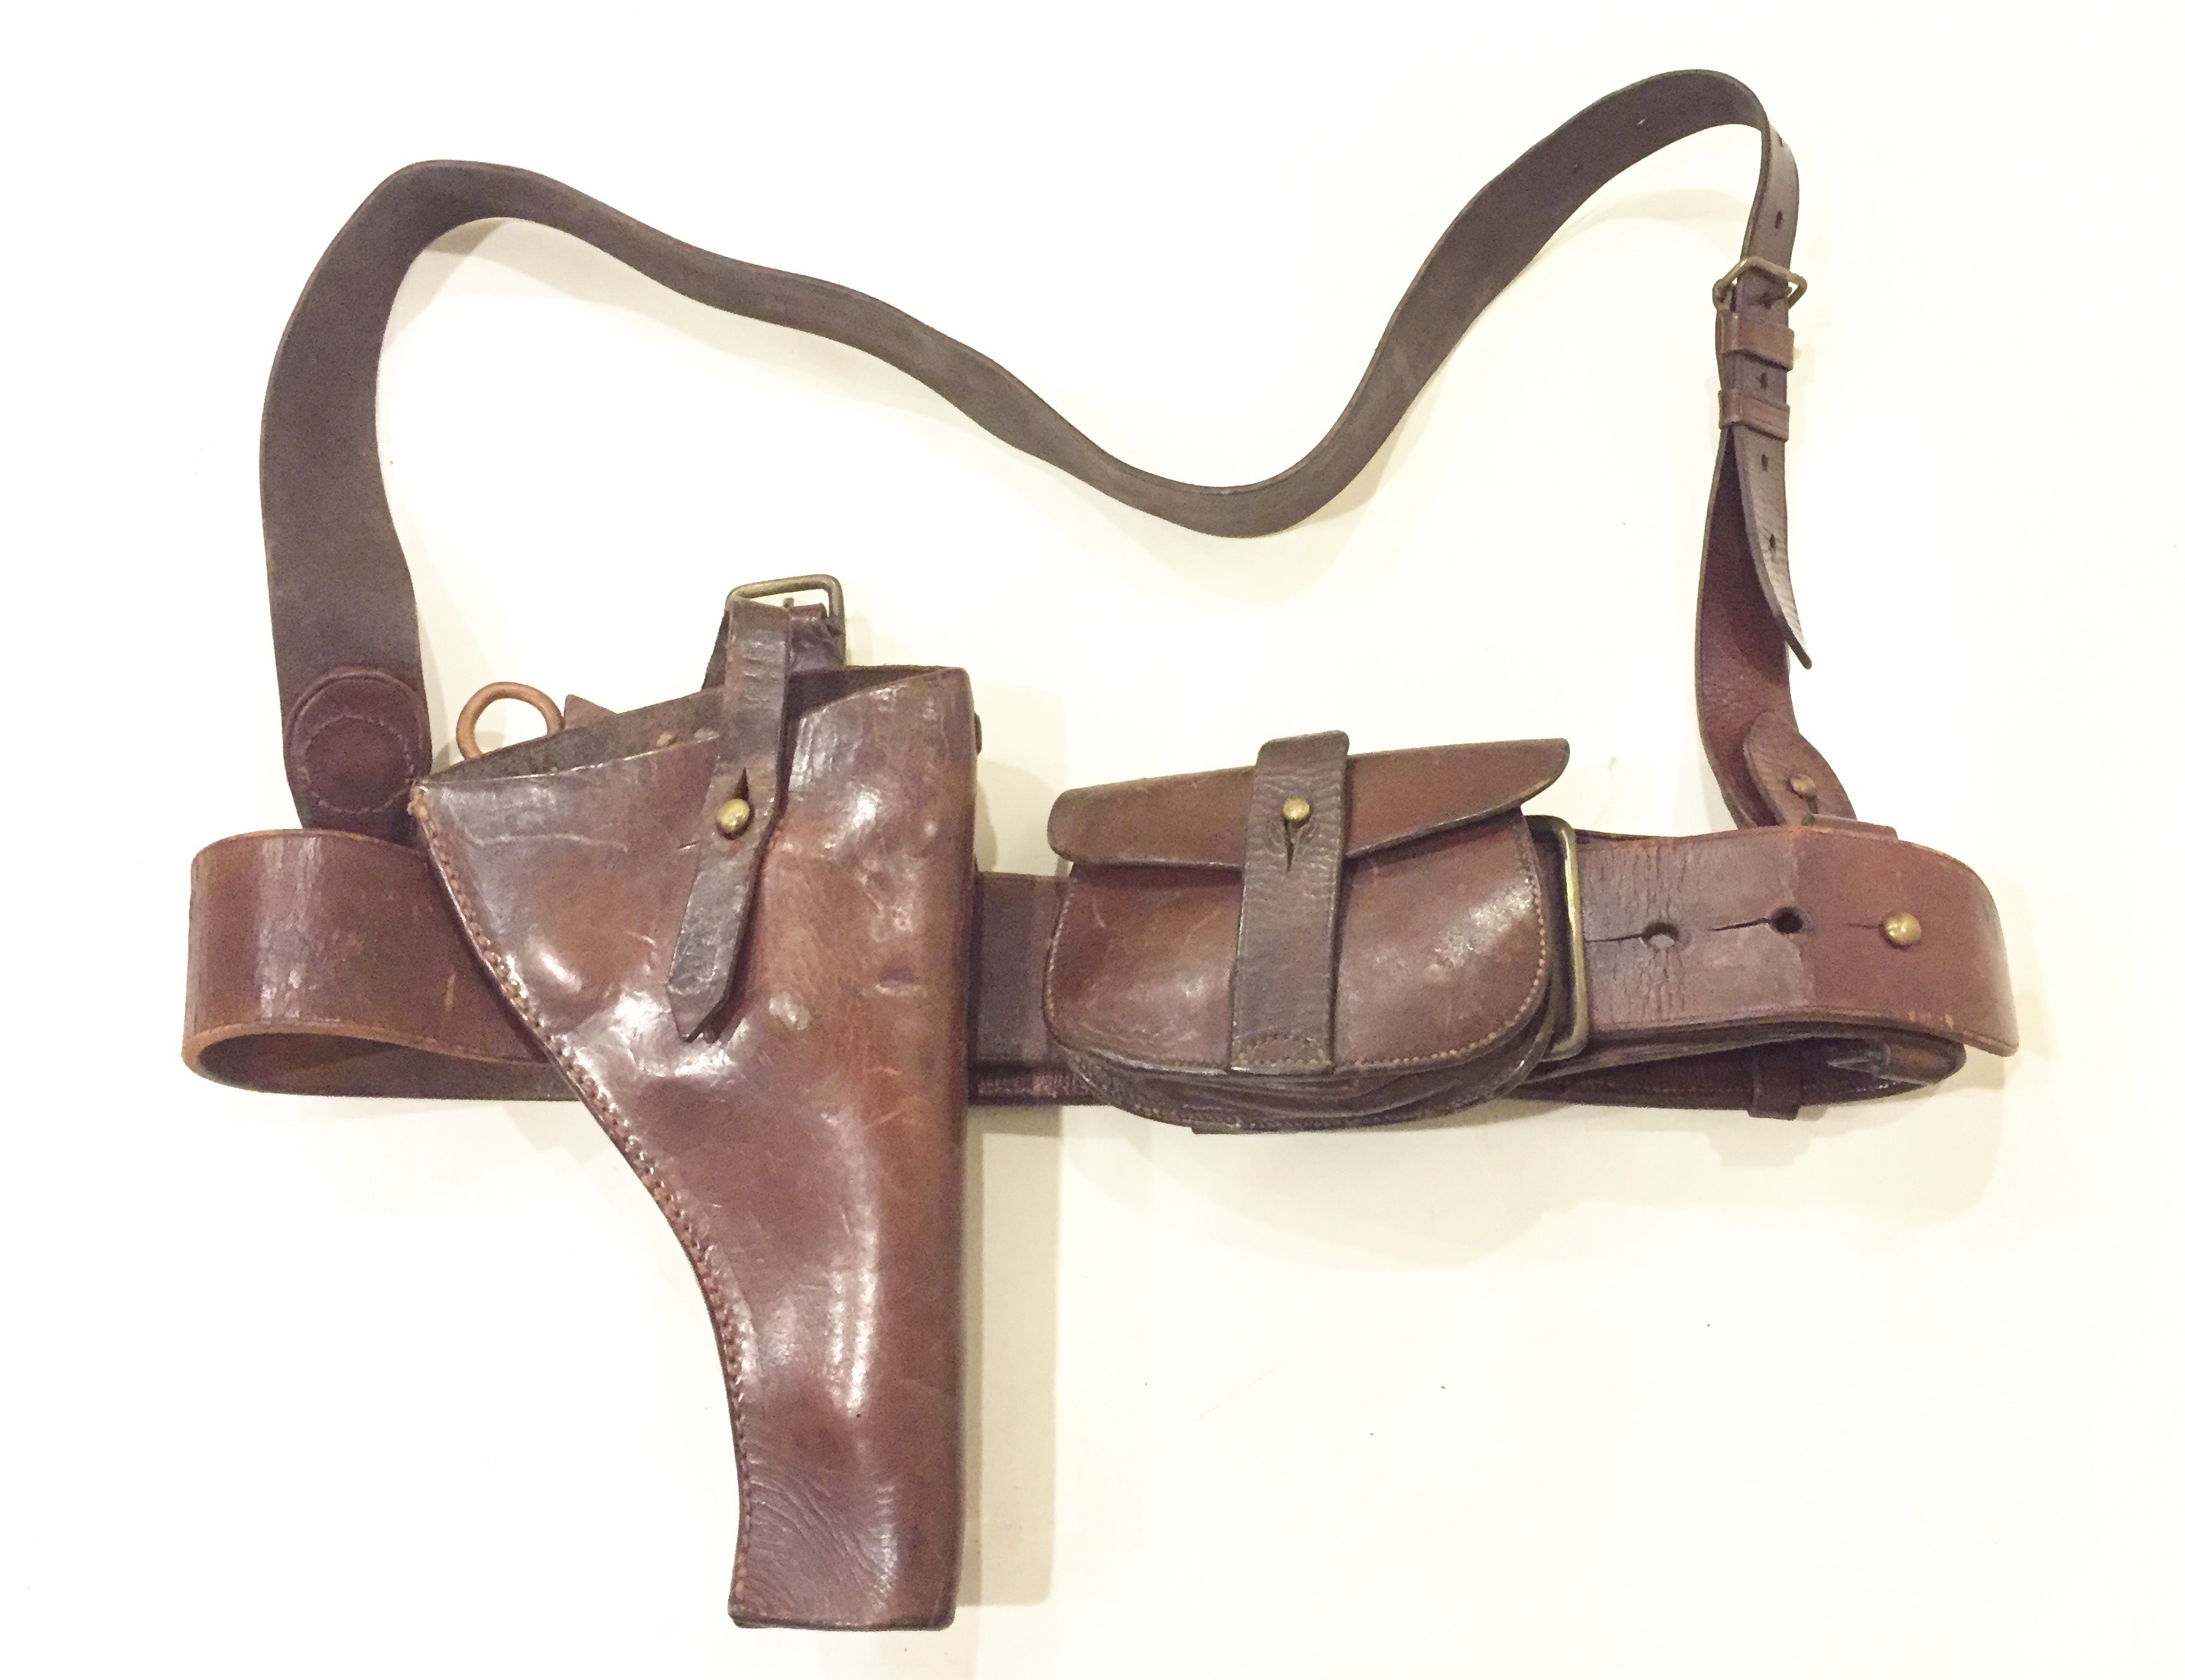 WW1 Period British Army Leather Equipment. Comprising: Officer’s Sam Browne belt with single brace